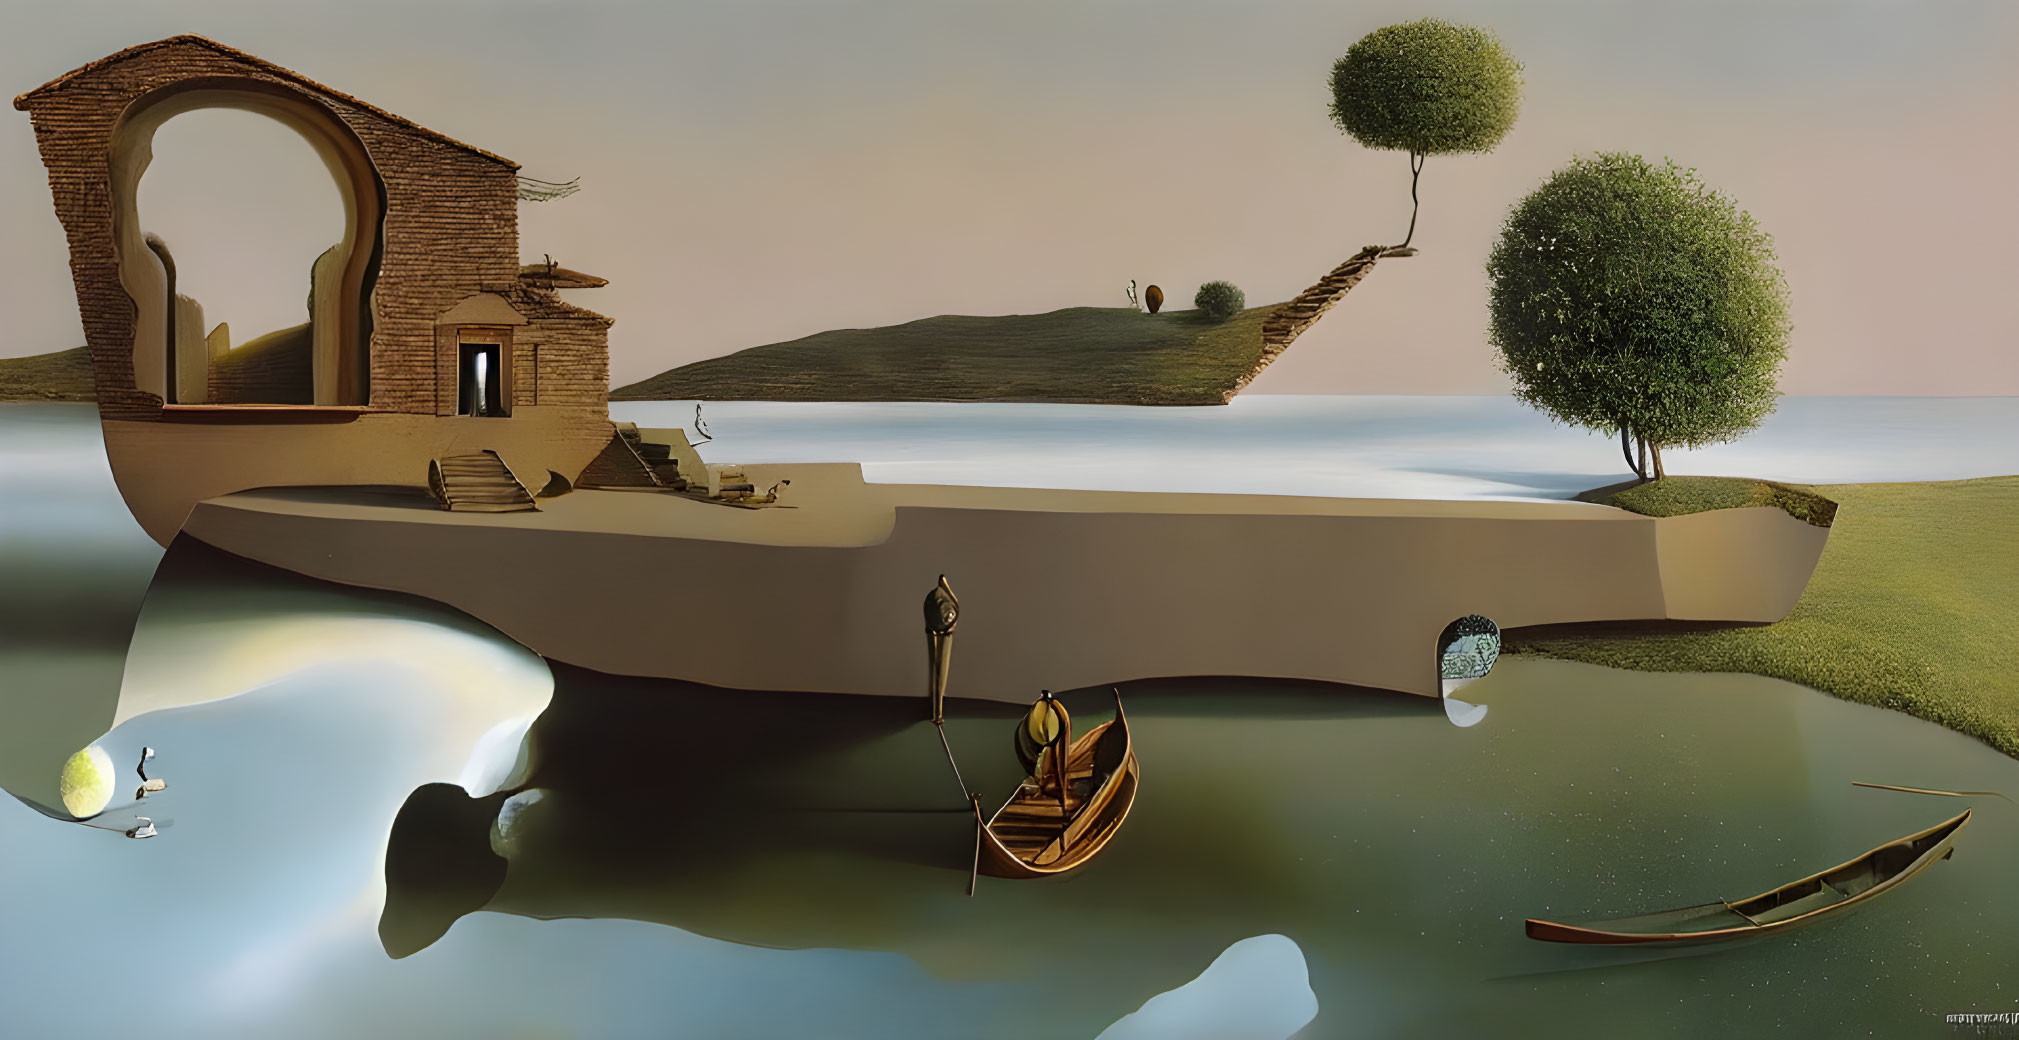 Surreal landscape with fragmented building, floating tree, and calm water